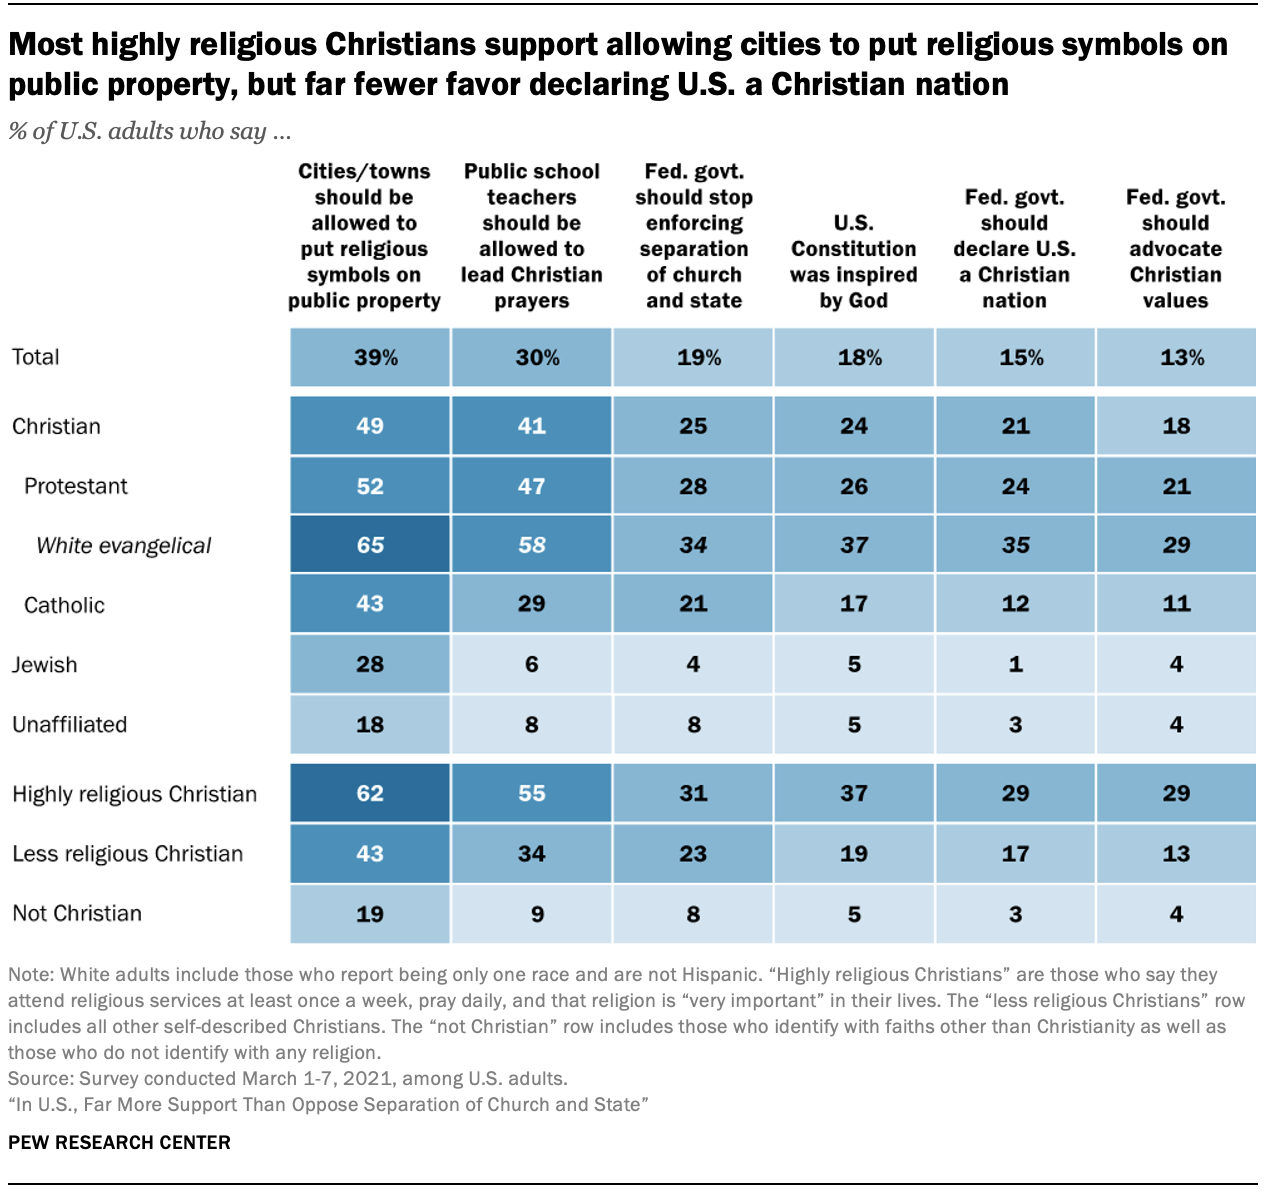 Most highly religious Christians support allowing cities to put religious symbols on public property, but far fewer favor declaring U.S. a Christian nation